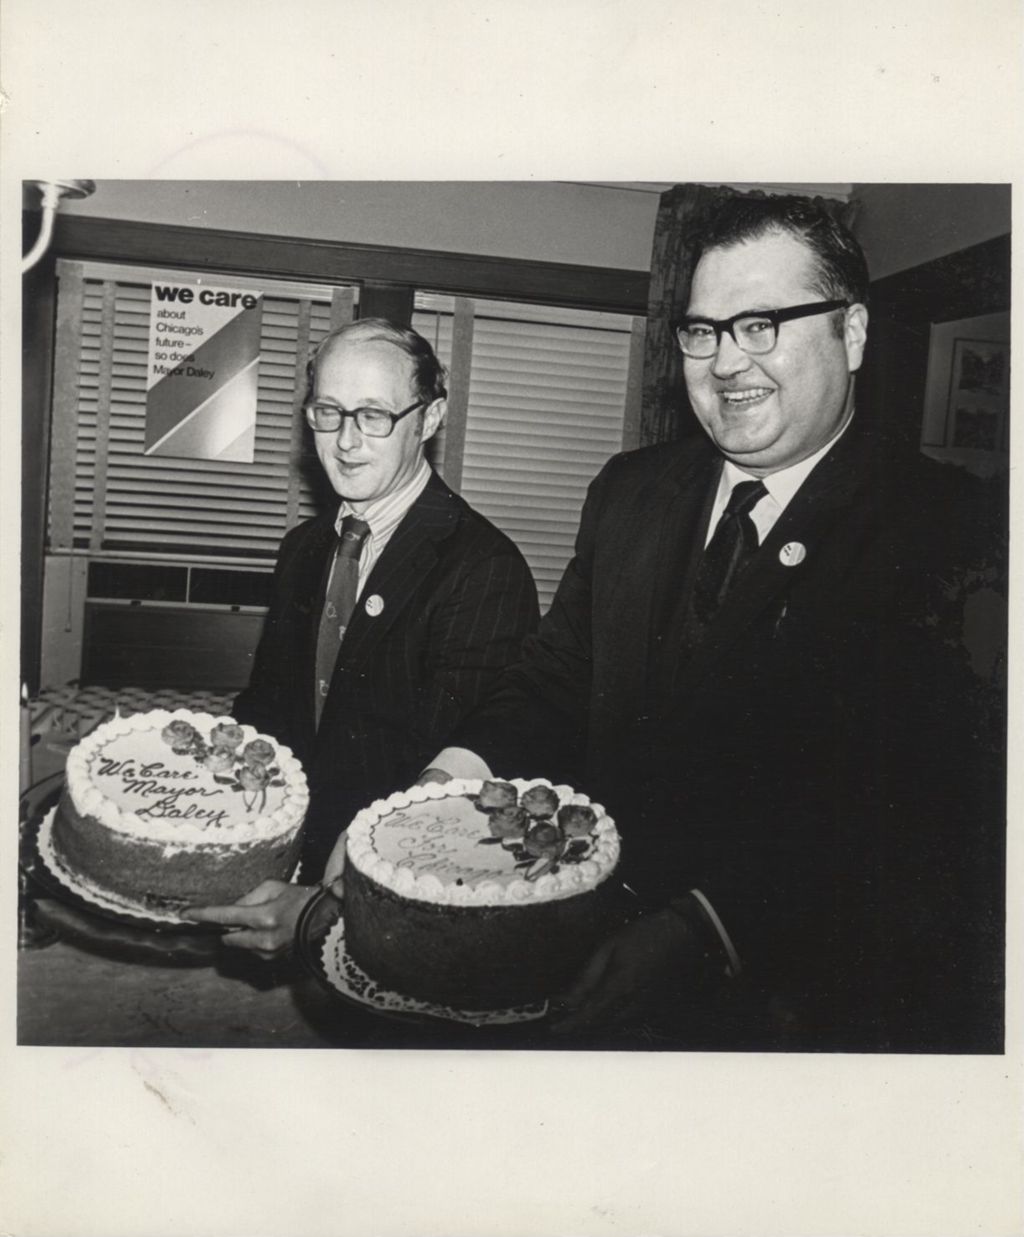 Two men holding cakes that read "We Care Mayor Daley"